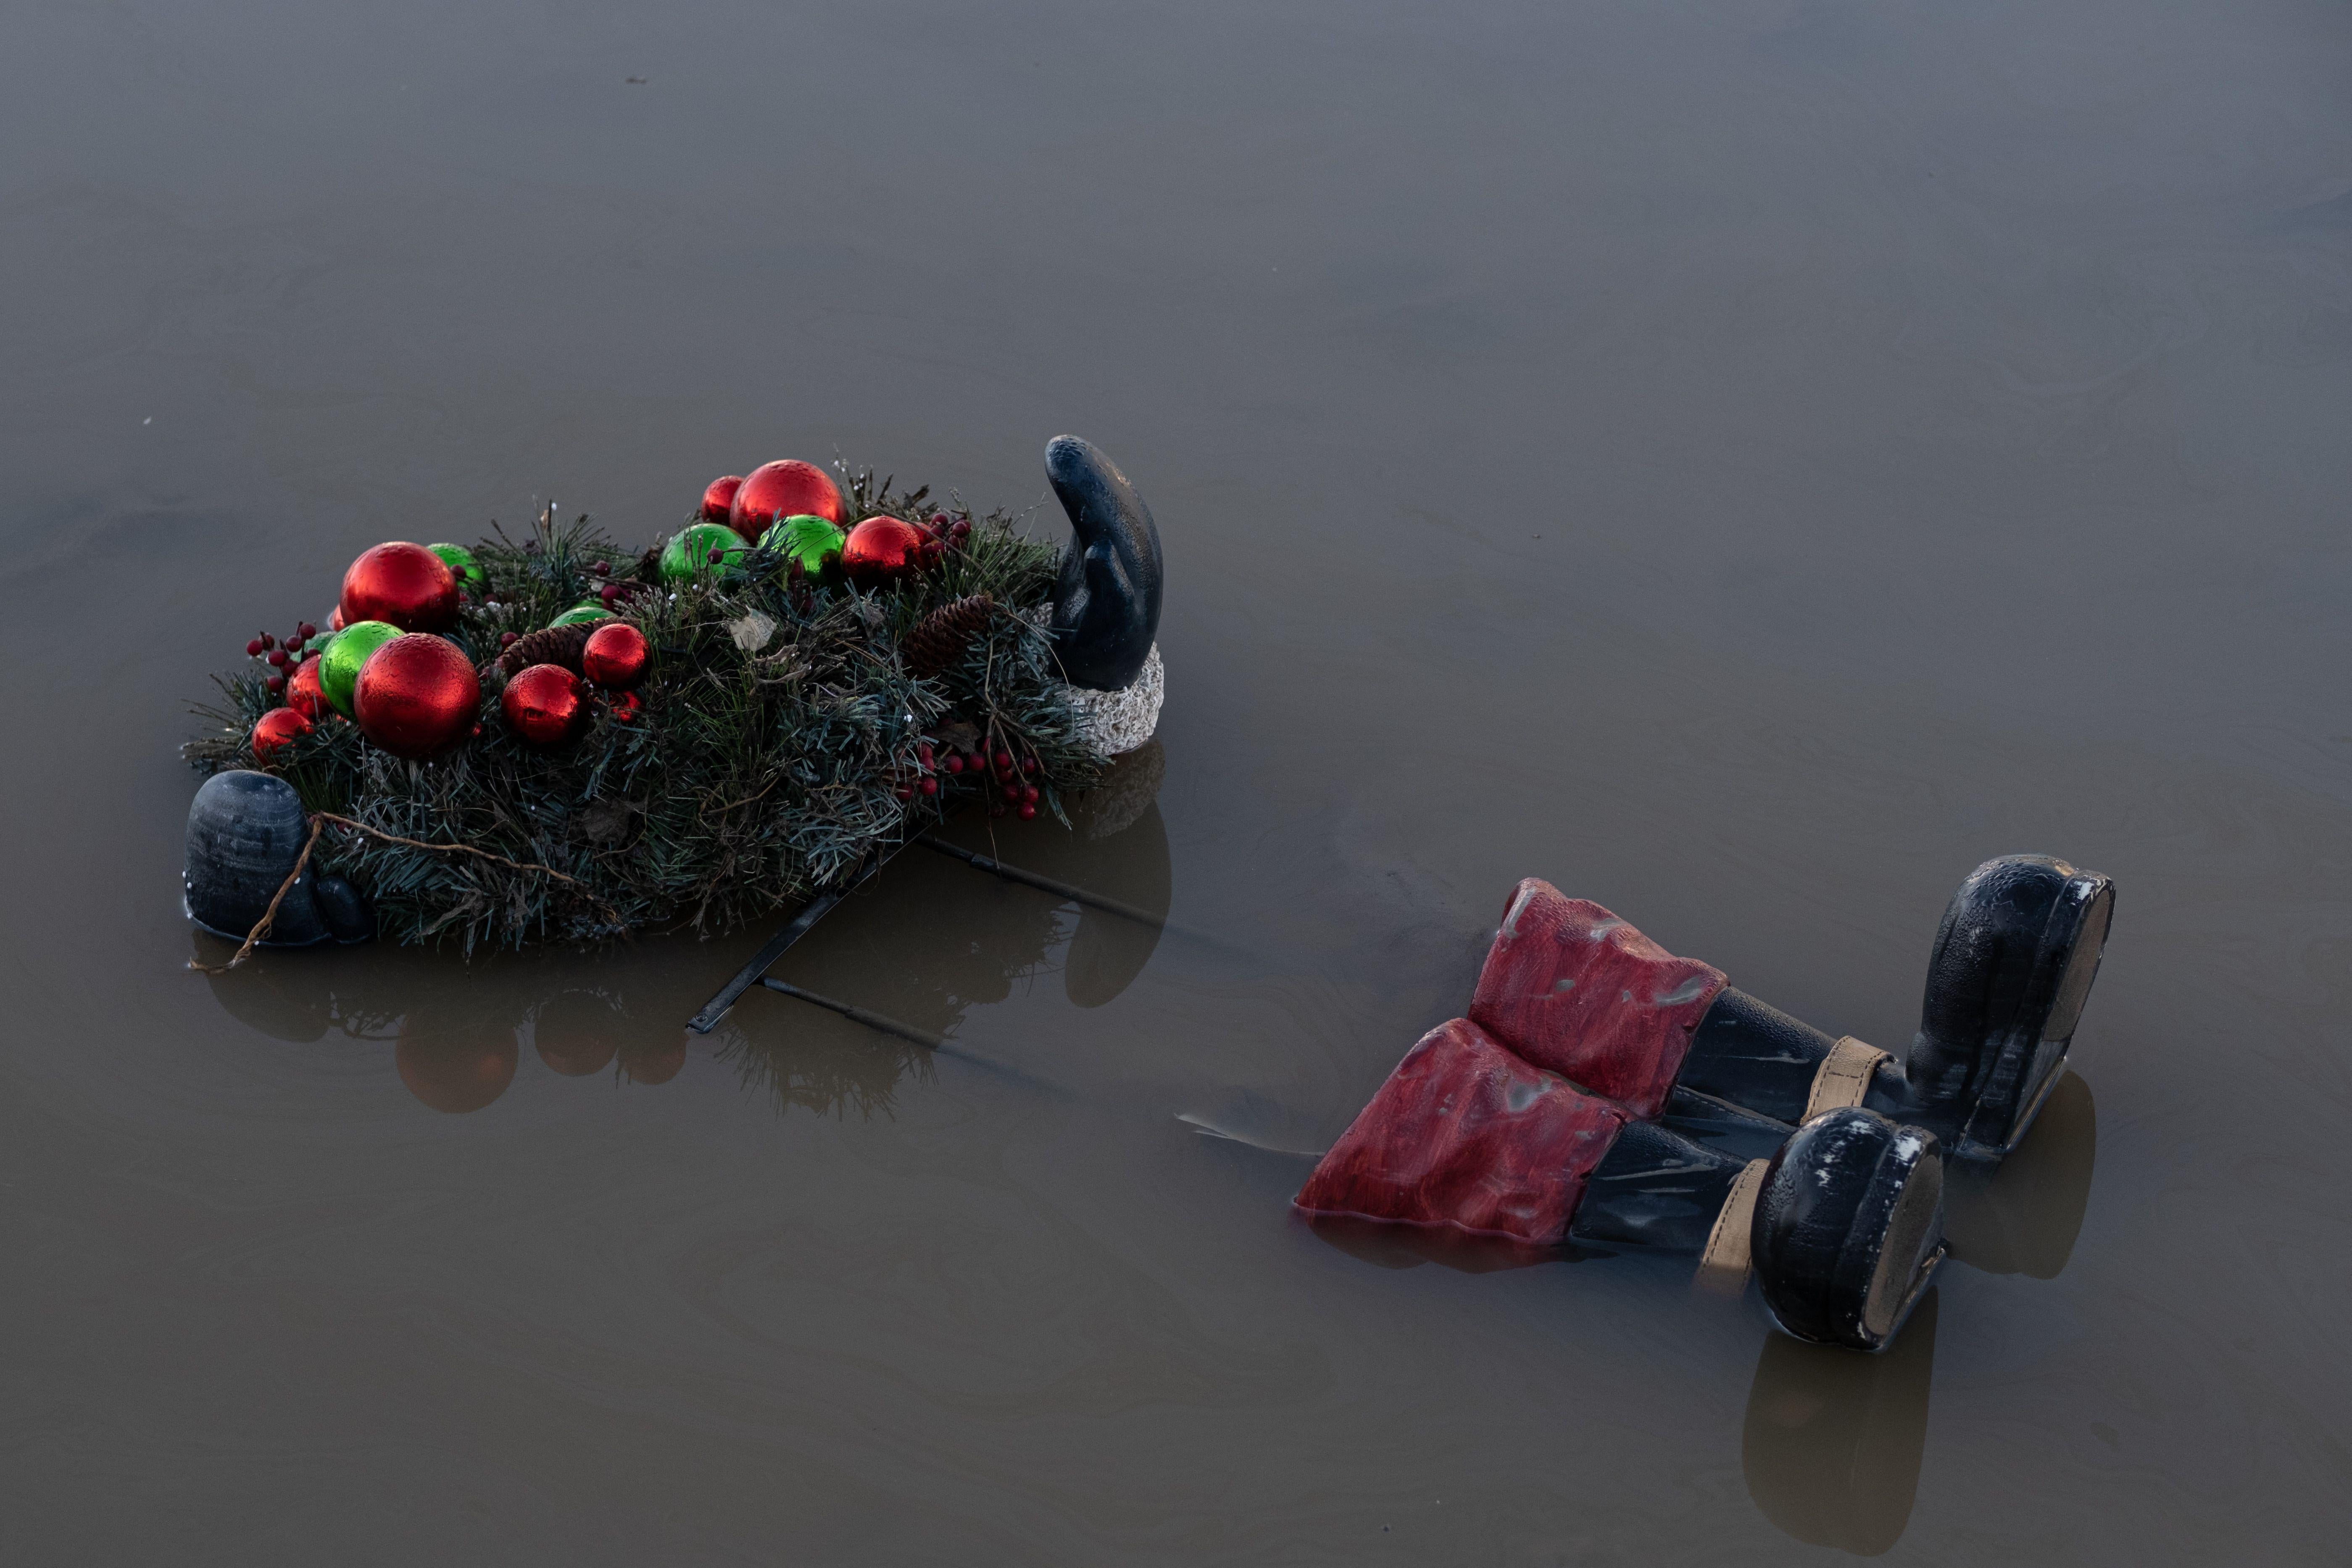 A wreath seen on top of a floating skeleton of a Santa Clause figure, whose glove and boots are still visible